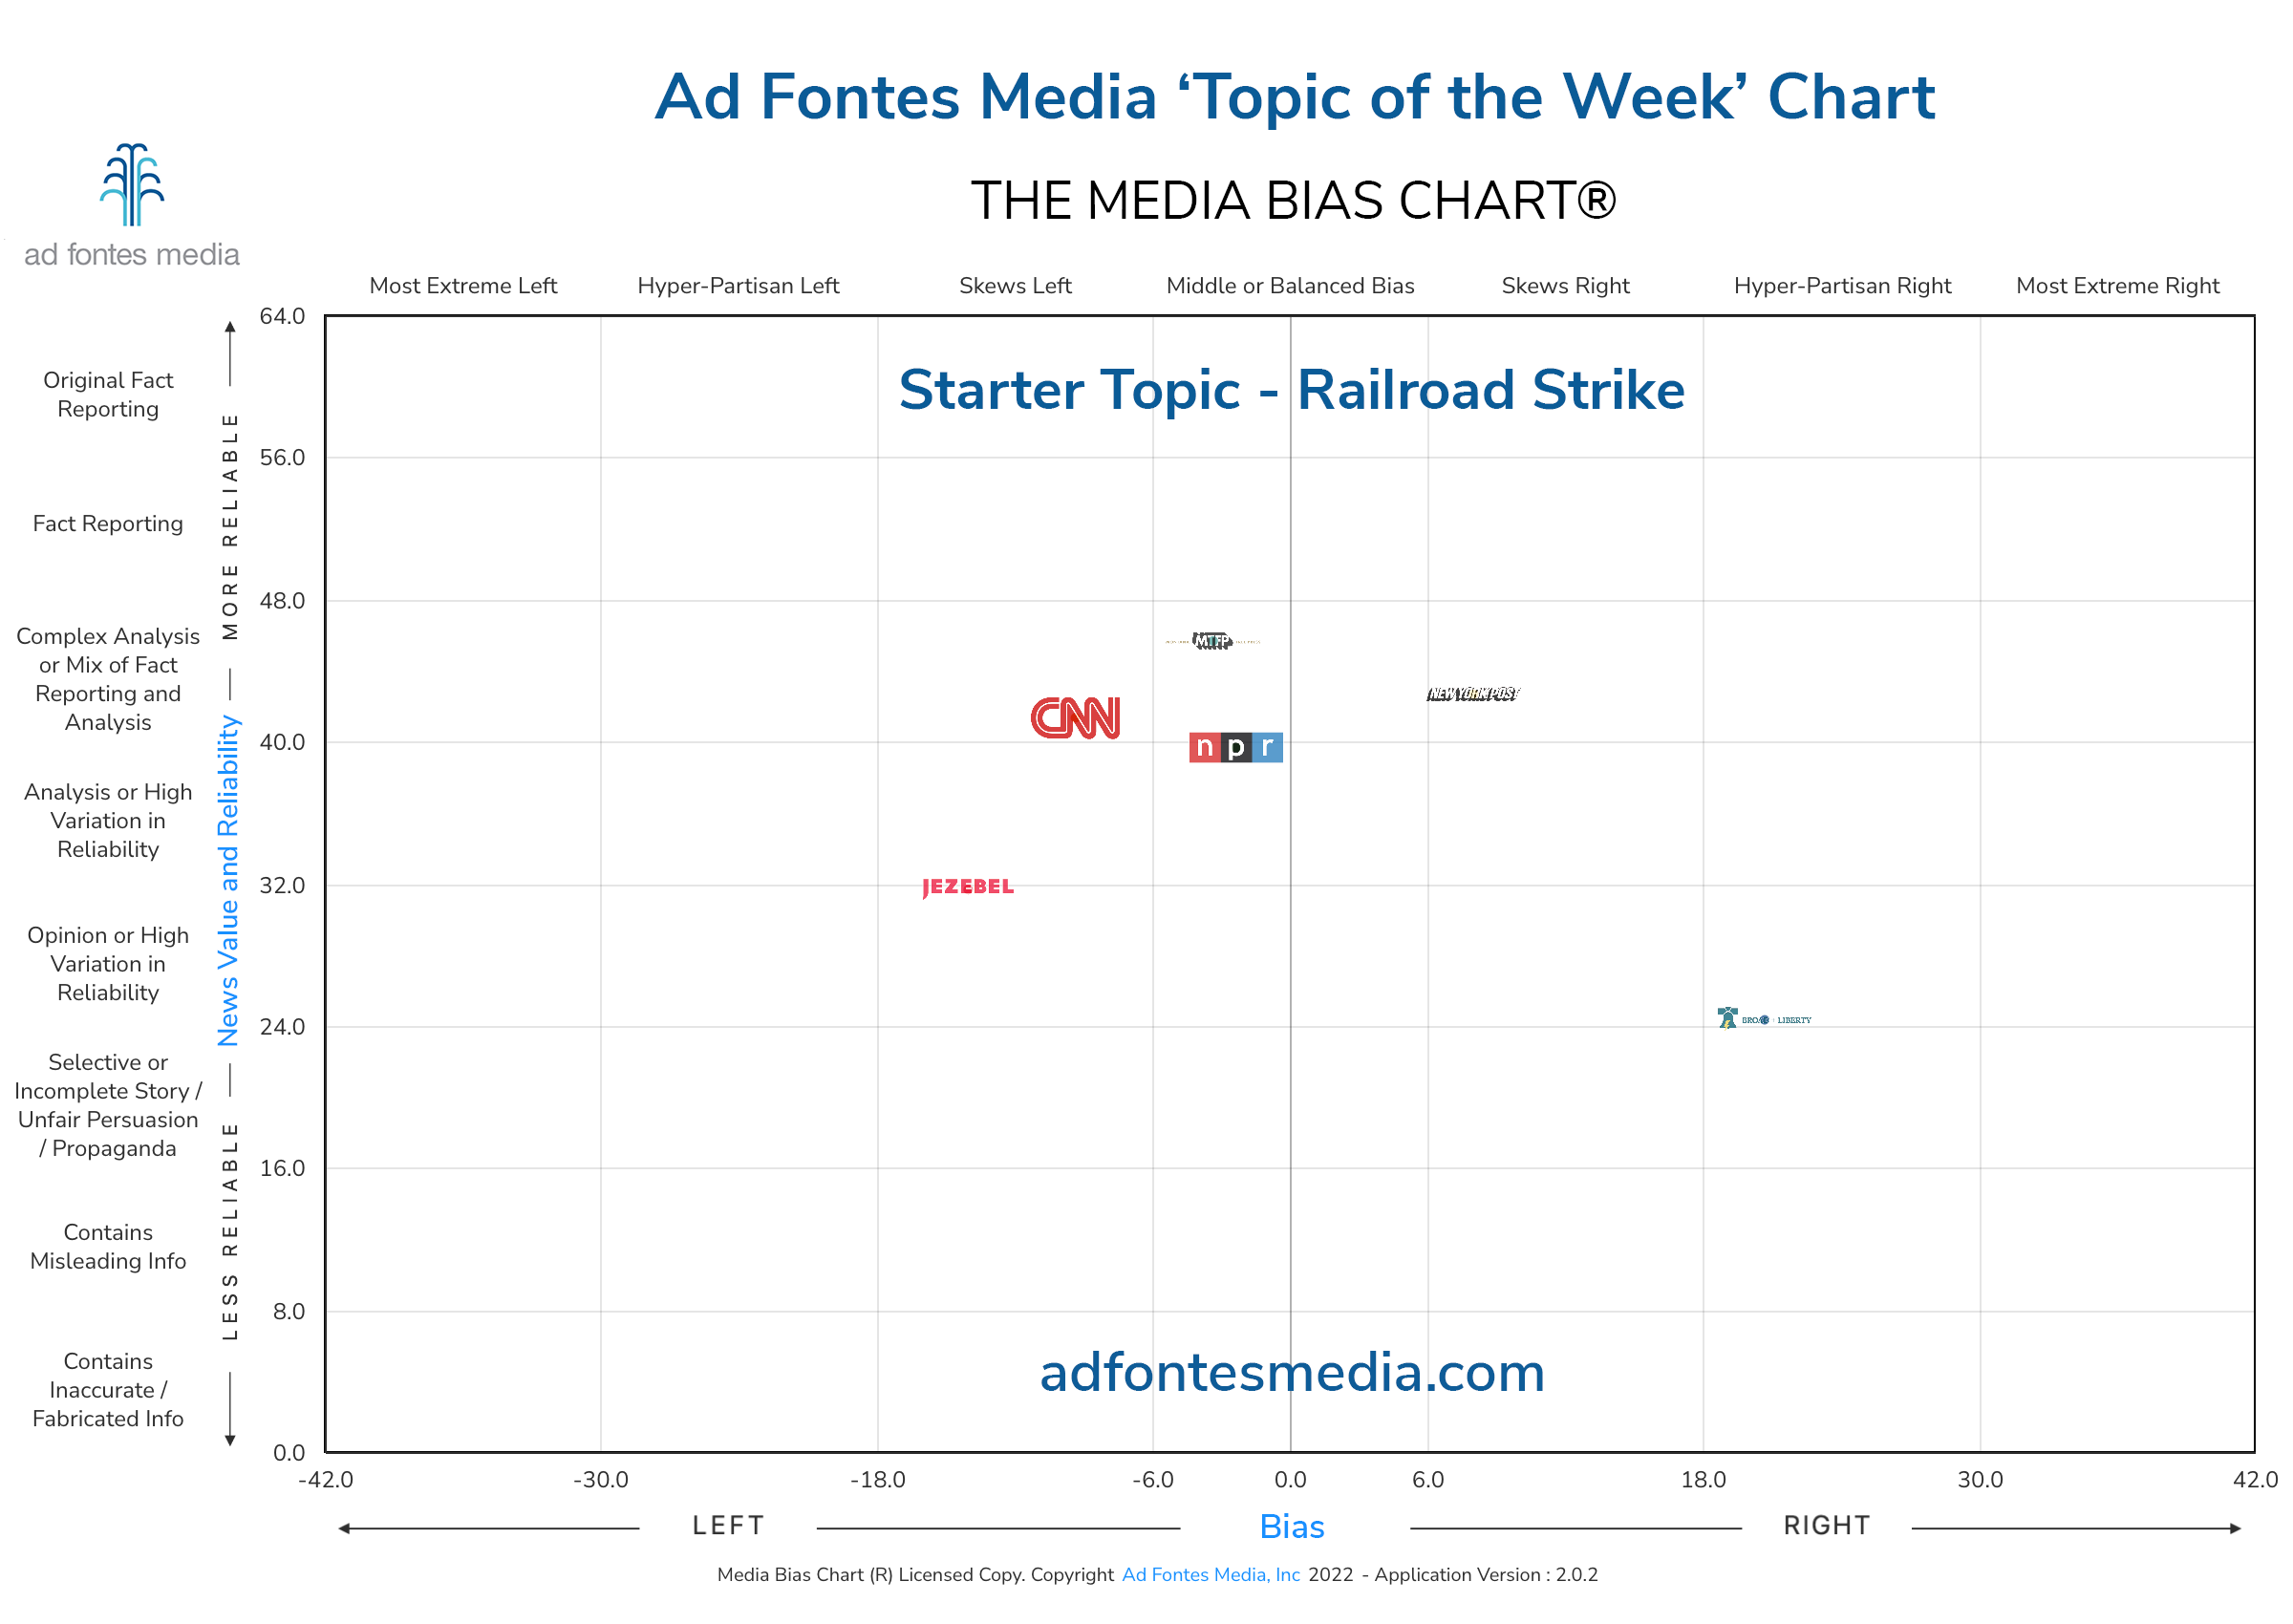 Scores of the Railroad Strike articles on the chart